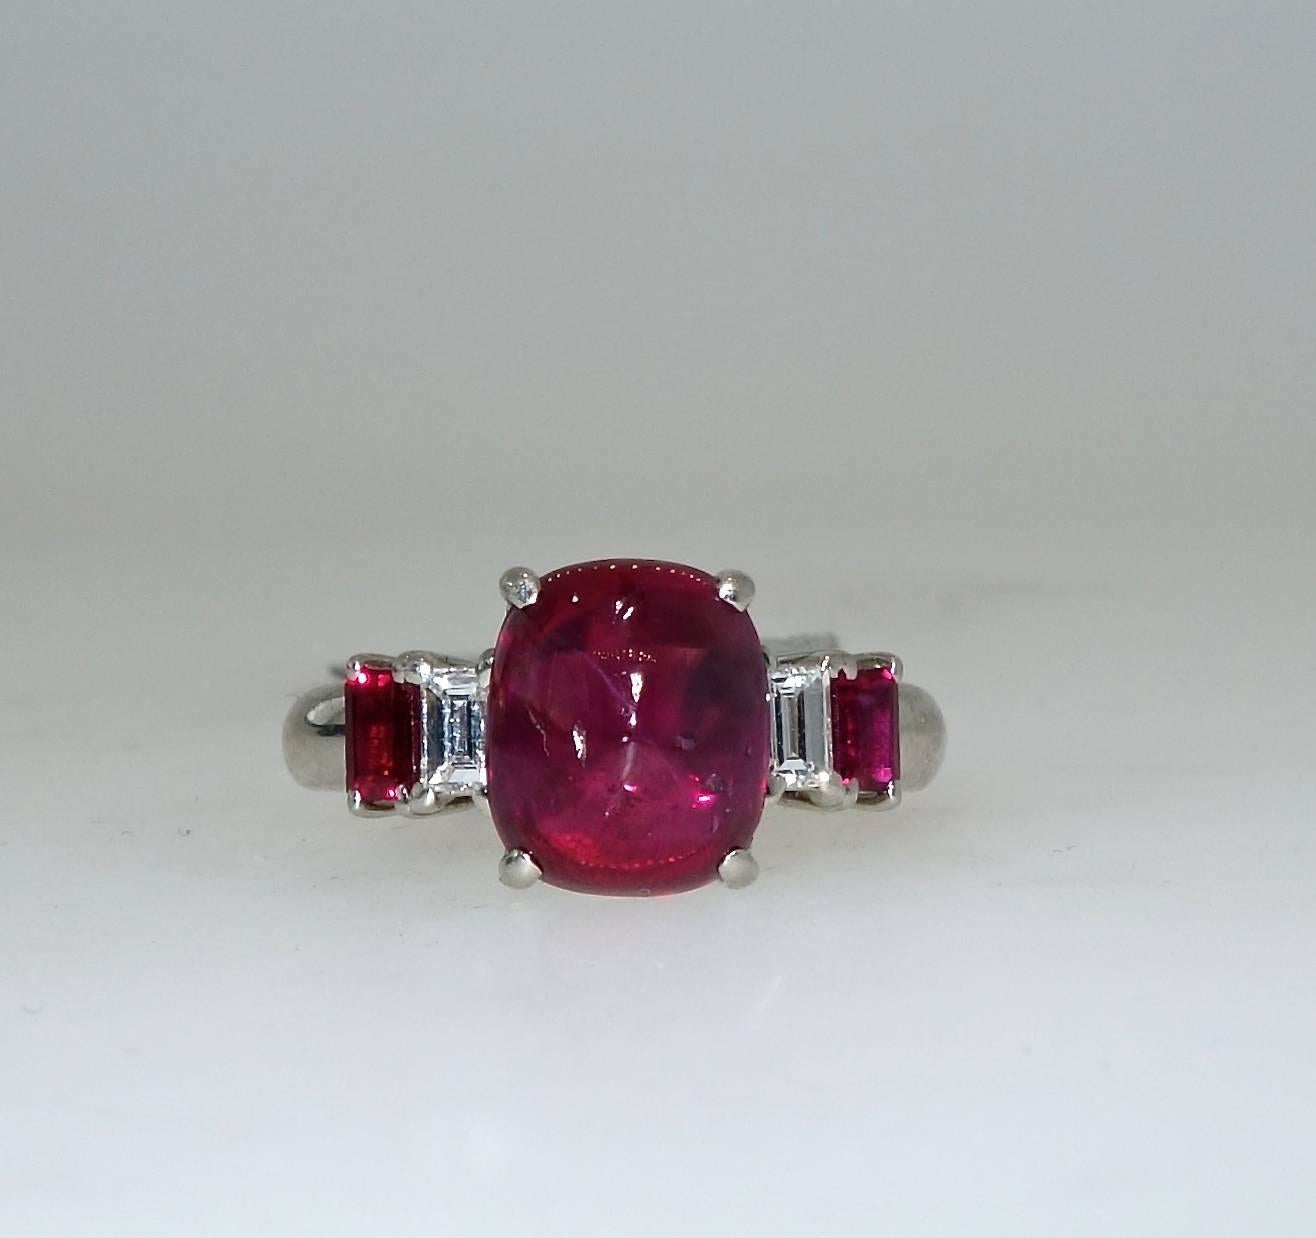 Prong set in platinum, centering this hand made ring is a fine natural unheated Burma ruby which is accompanied with a certificate from GIA  stating that the stone is unheated and Burma.  This ruby weighs 4.08 cts.  It is accented with fancy white